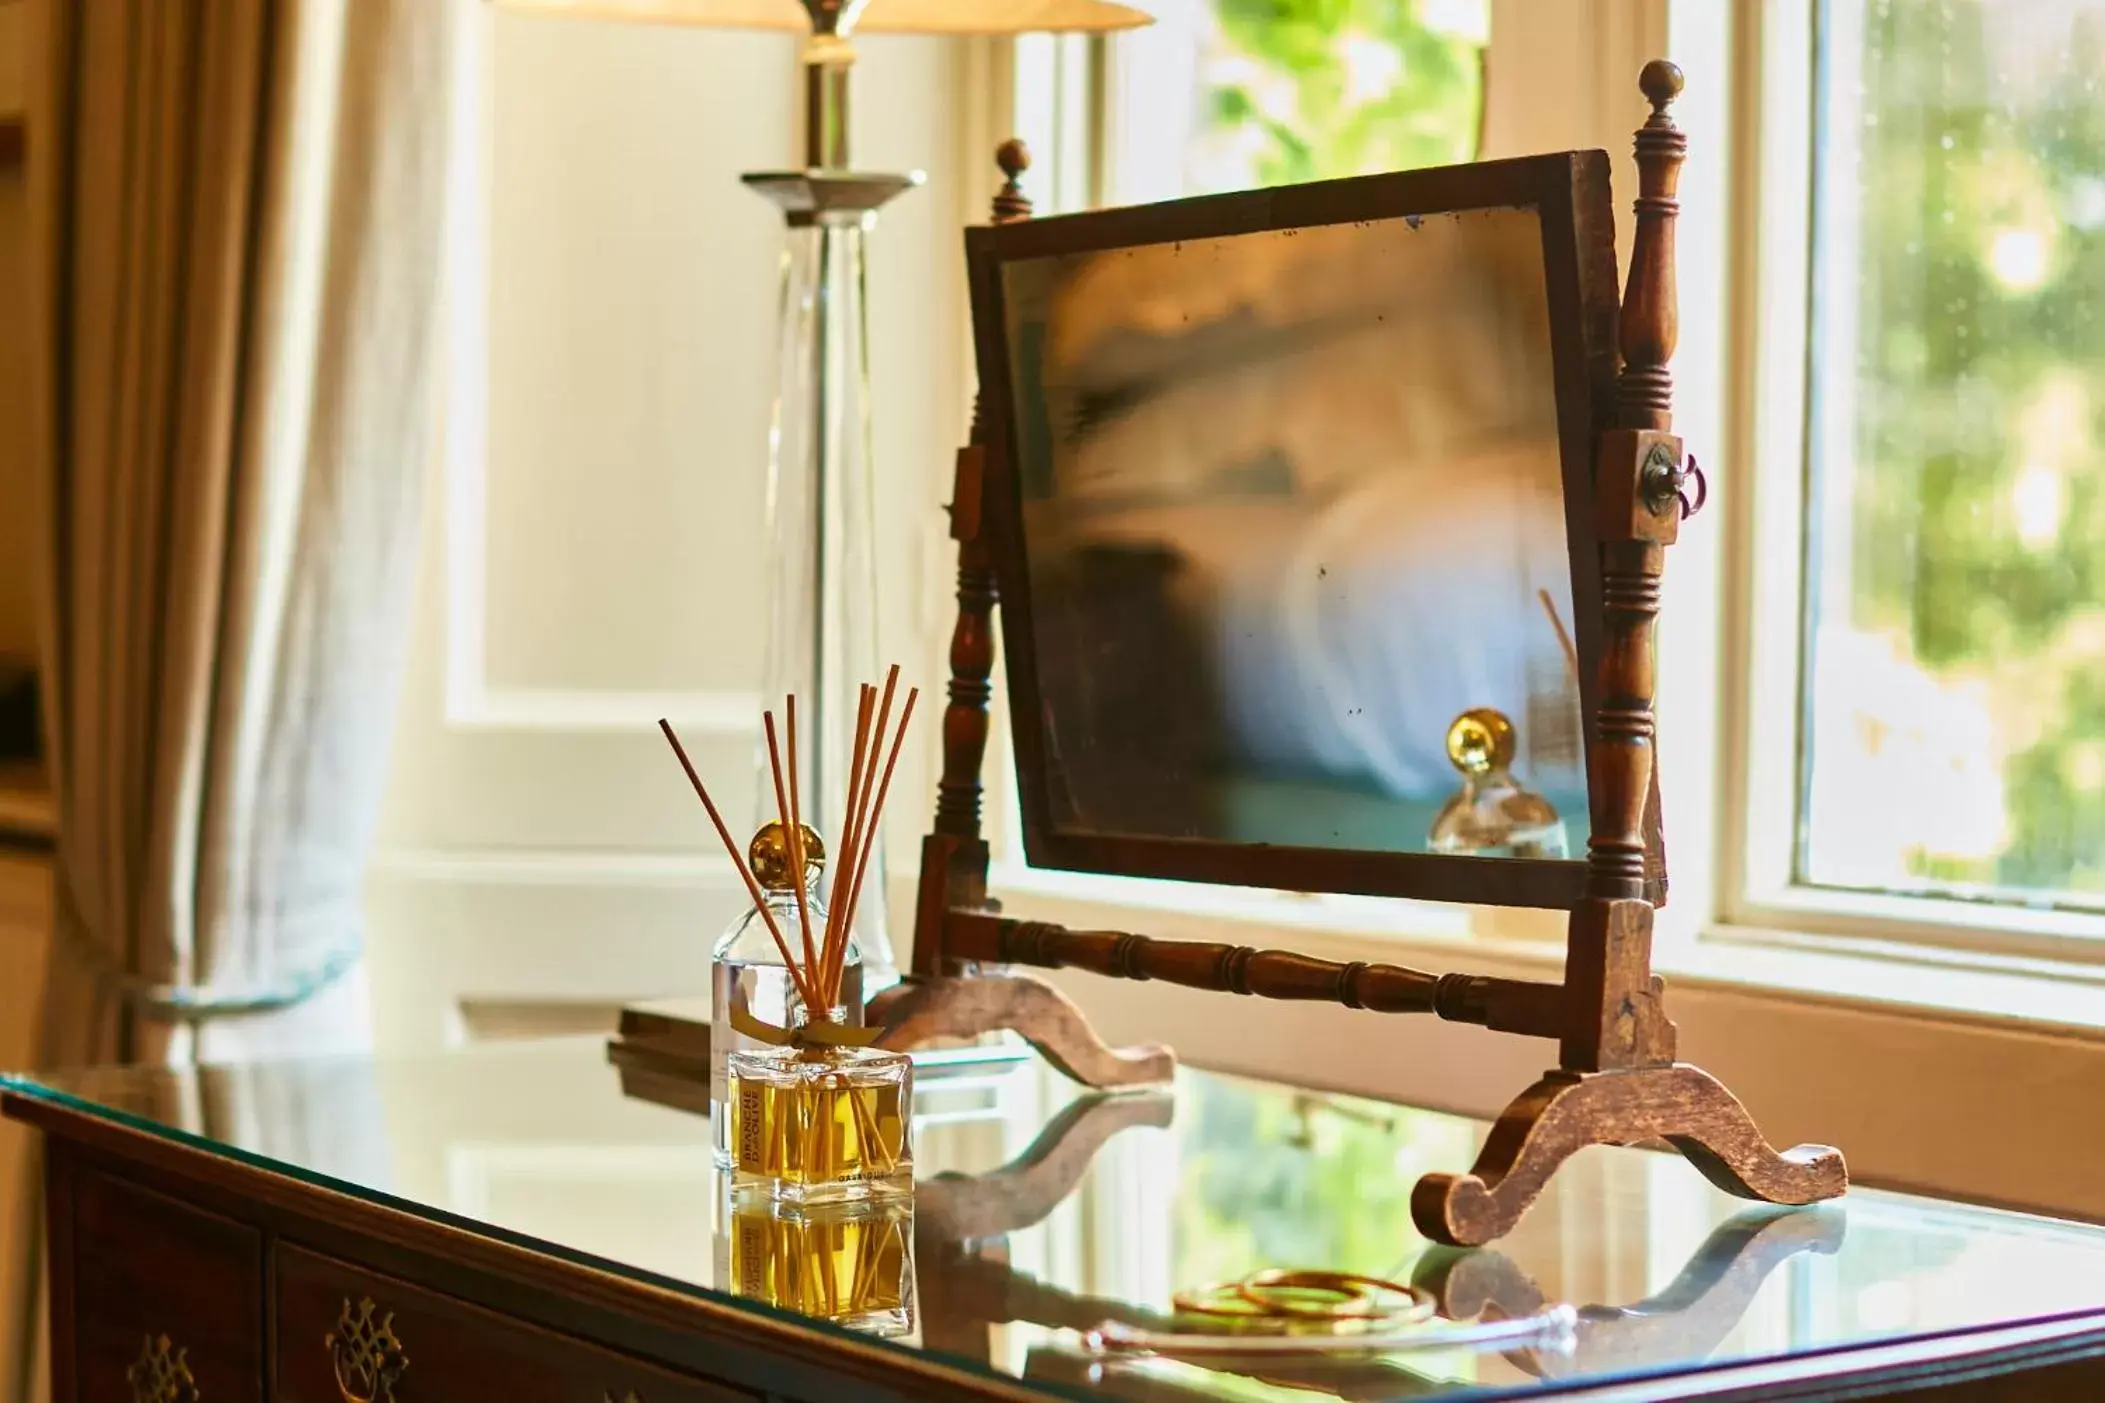 Decorative detail, TV/Entertainment Center in The Bath Priory - A Relais & Chateaux Hotel